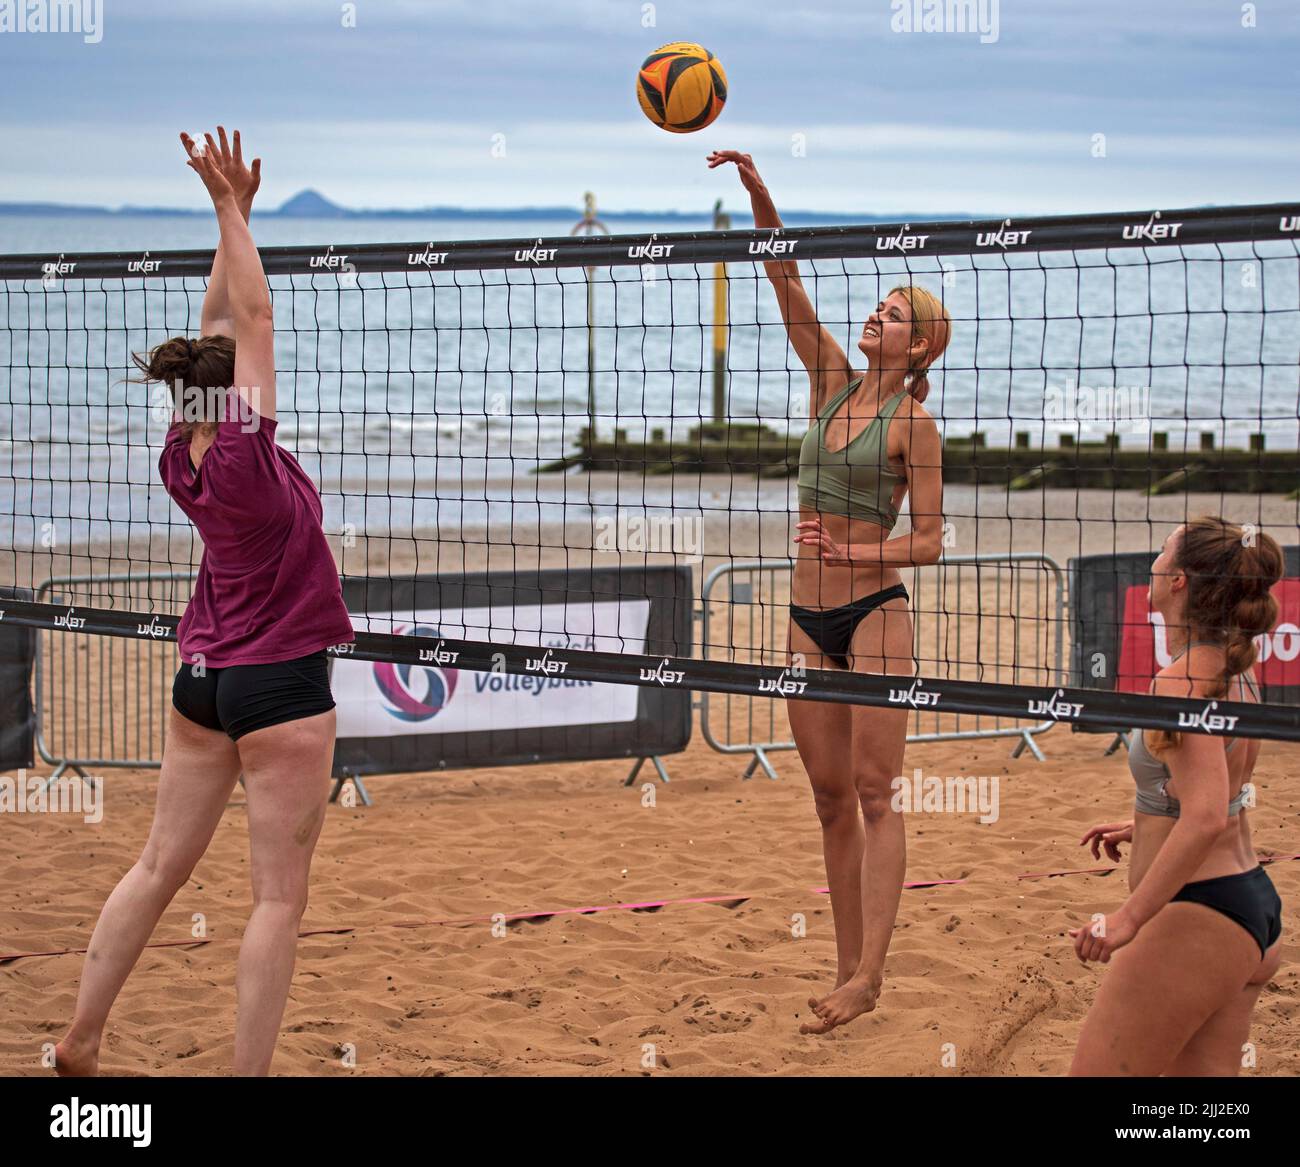 Portobello, Edinburgh, Scotland. July 2022. 22nd July 2022. Scotland Grand Slam Series, Female Qualification Tournament. UKBT 3 star event. The tournament for both female and Male teams takes place during Saturday and Sunday when the weather forecast predicts showers. Credit: Arch White/alamy live news. Stock Photo